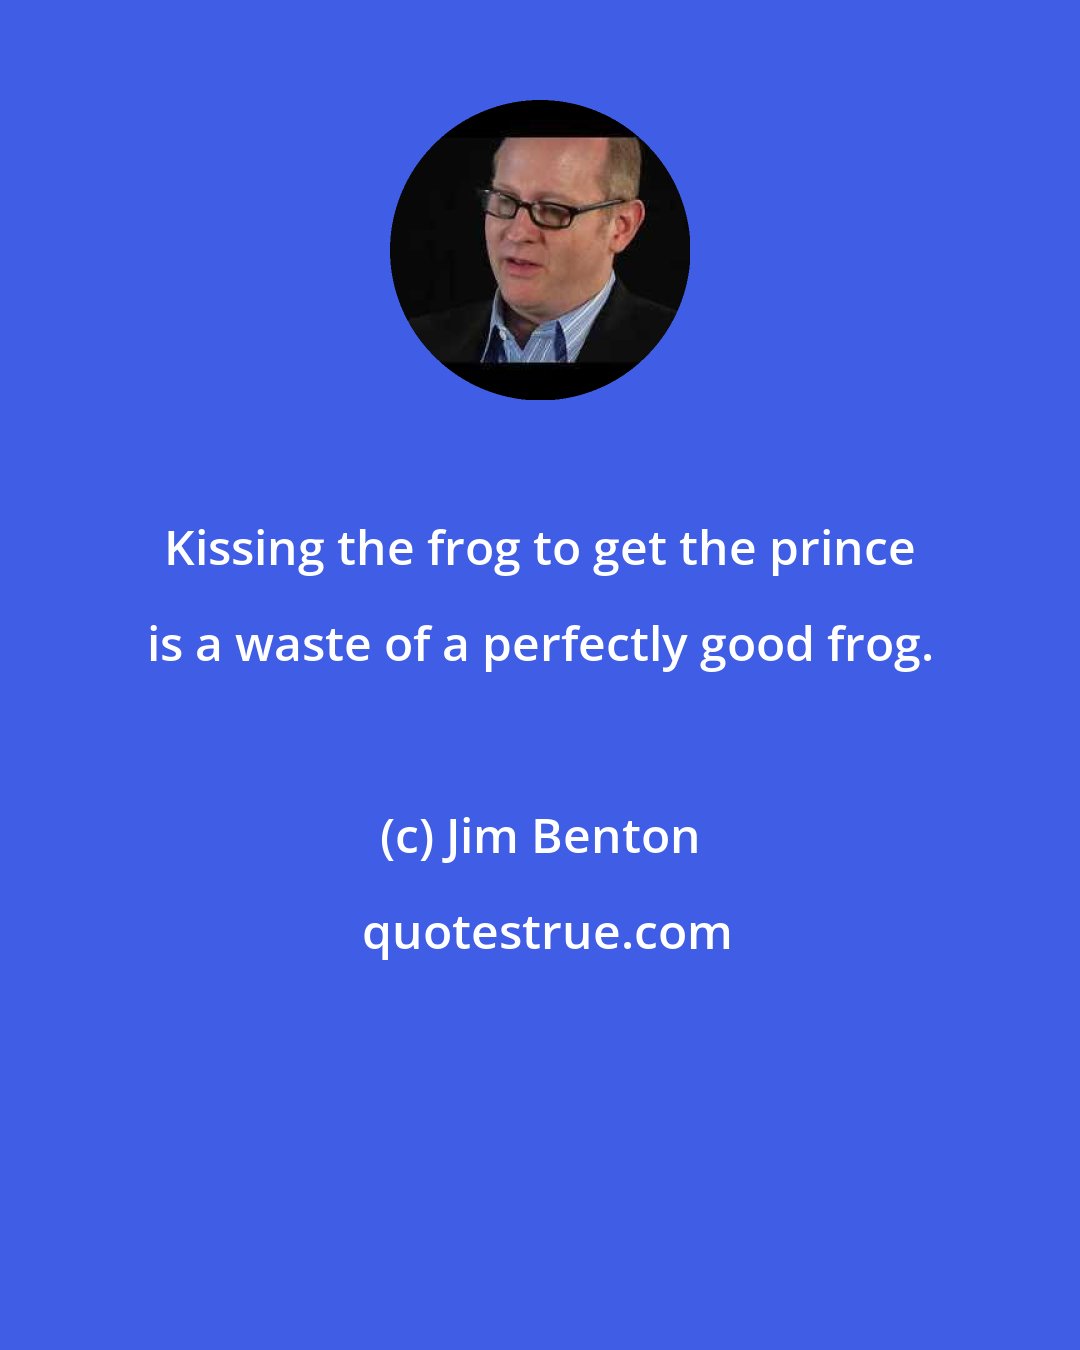 Jim Benton: Kissing the frog to get the prince is a waste of a perfectly good frog.